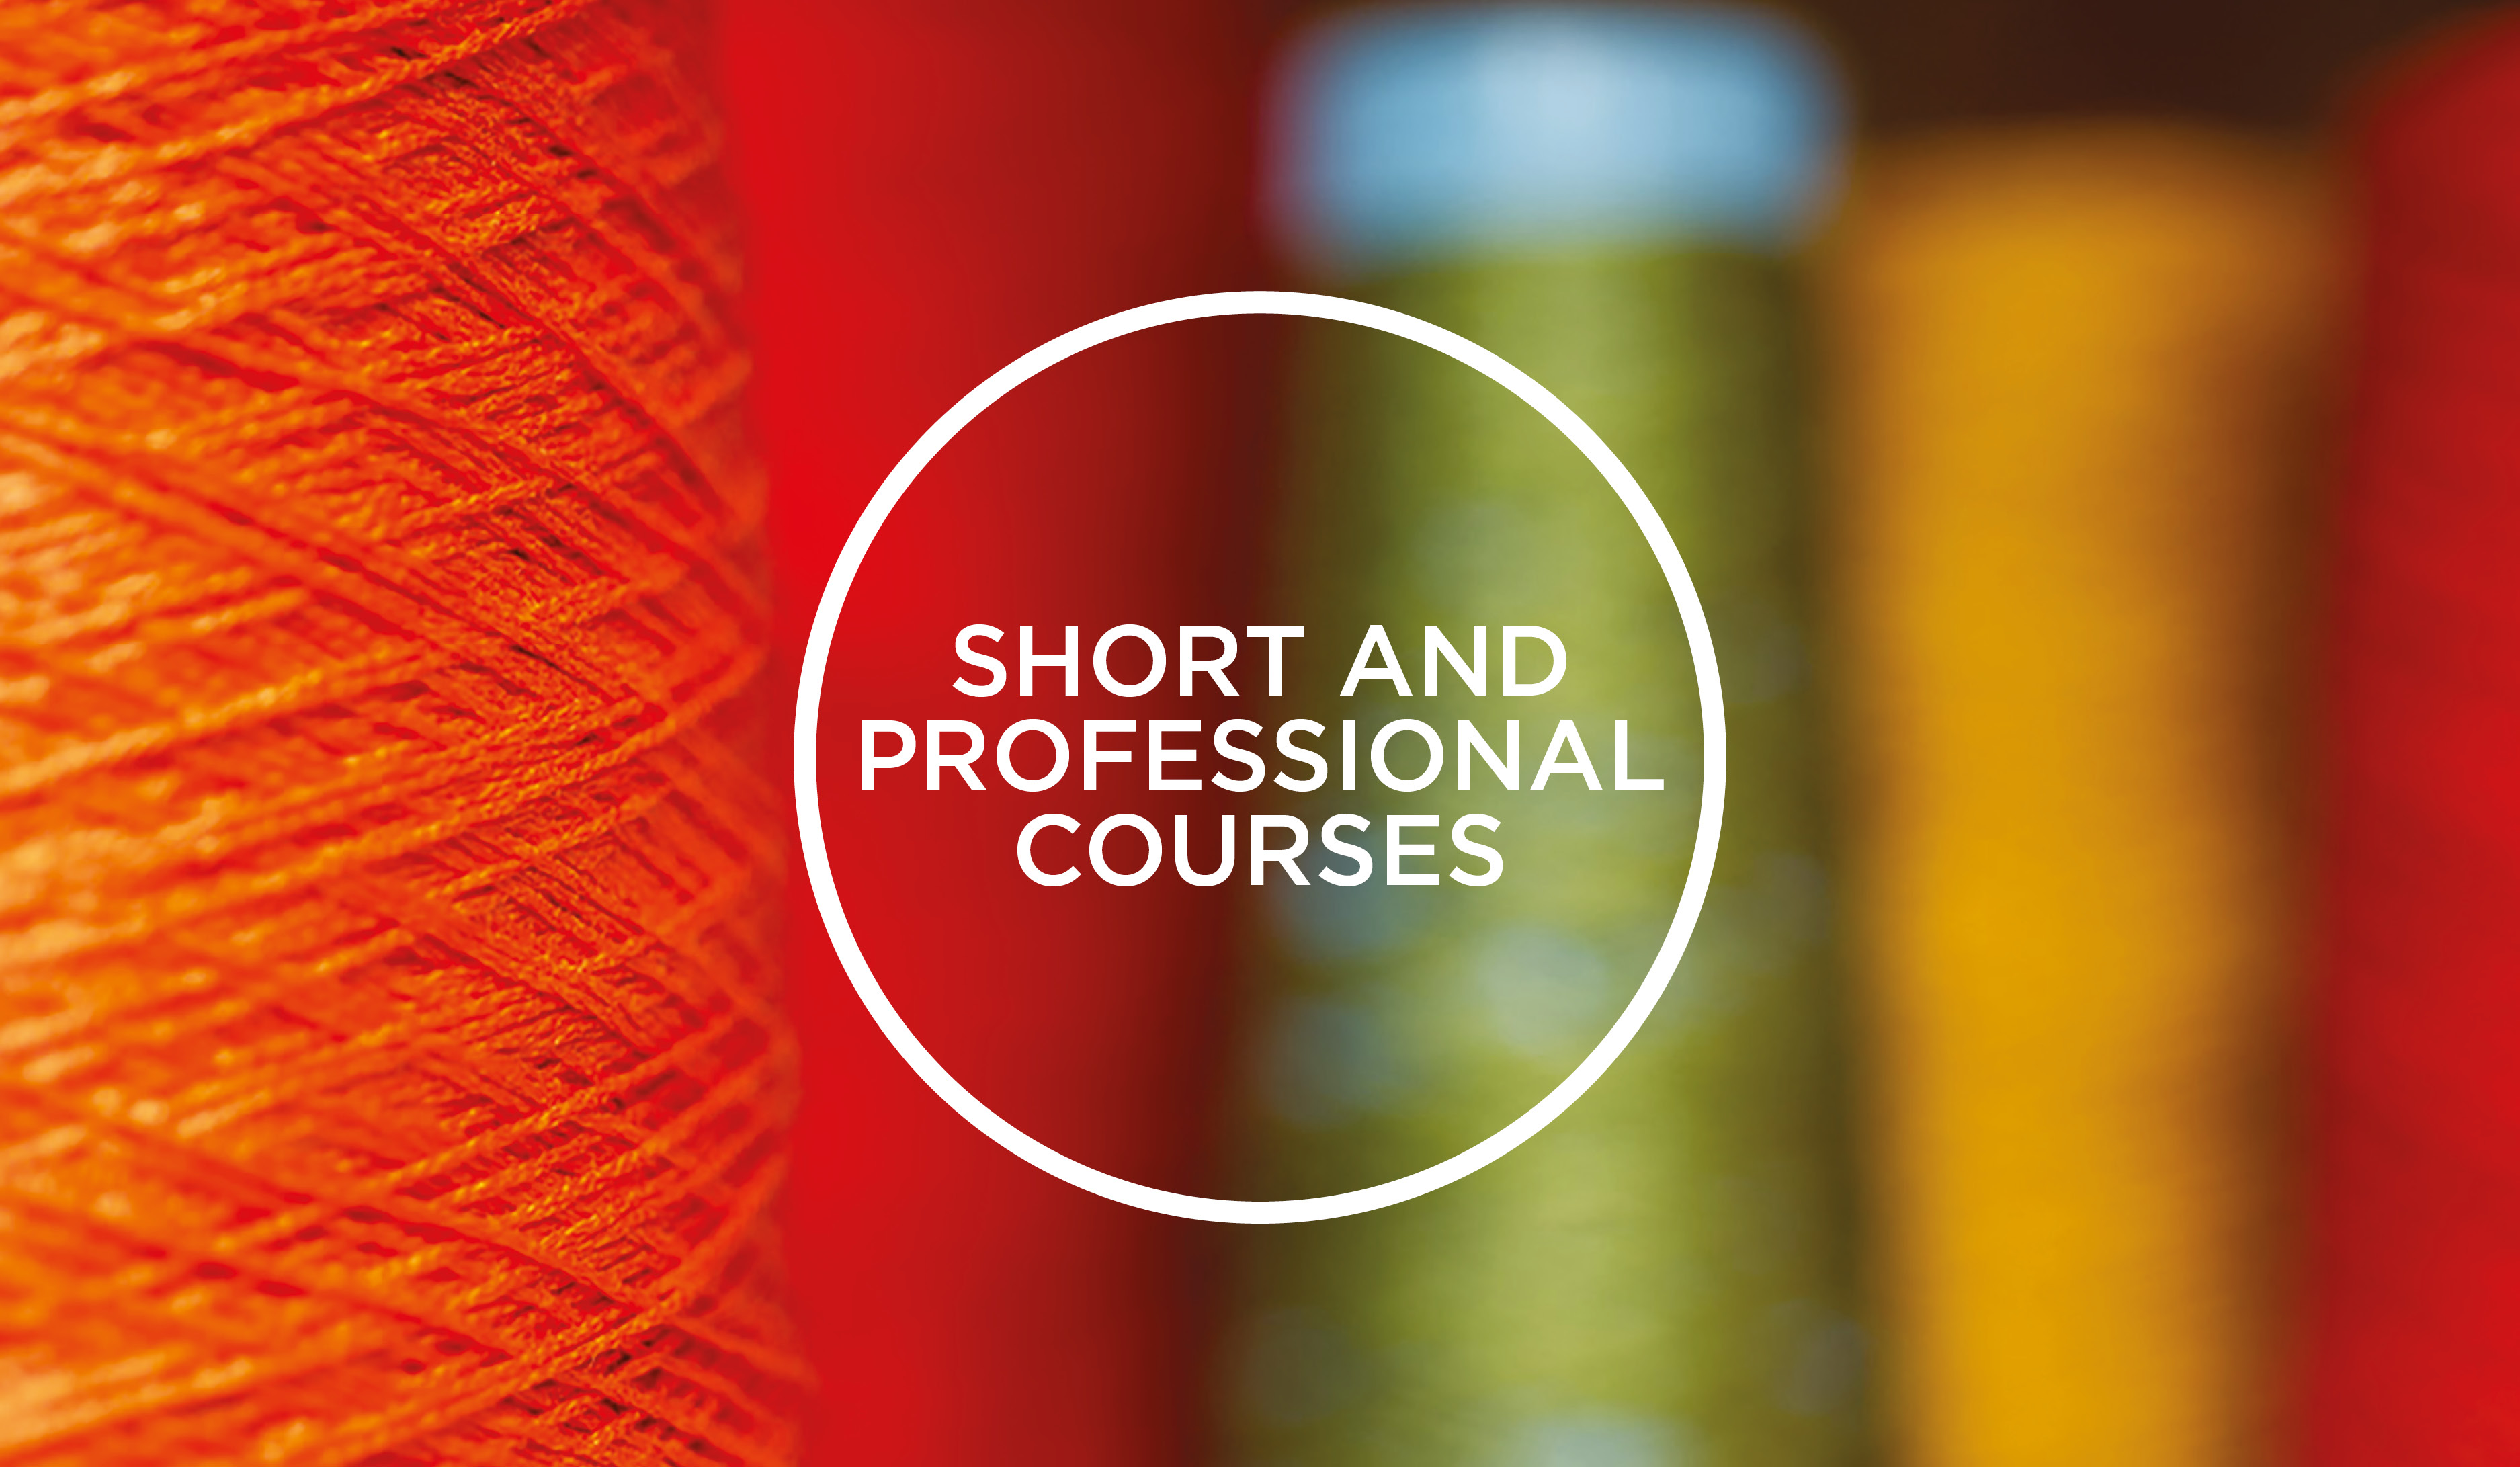 Short and Professional Courses brochure image